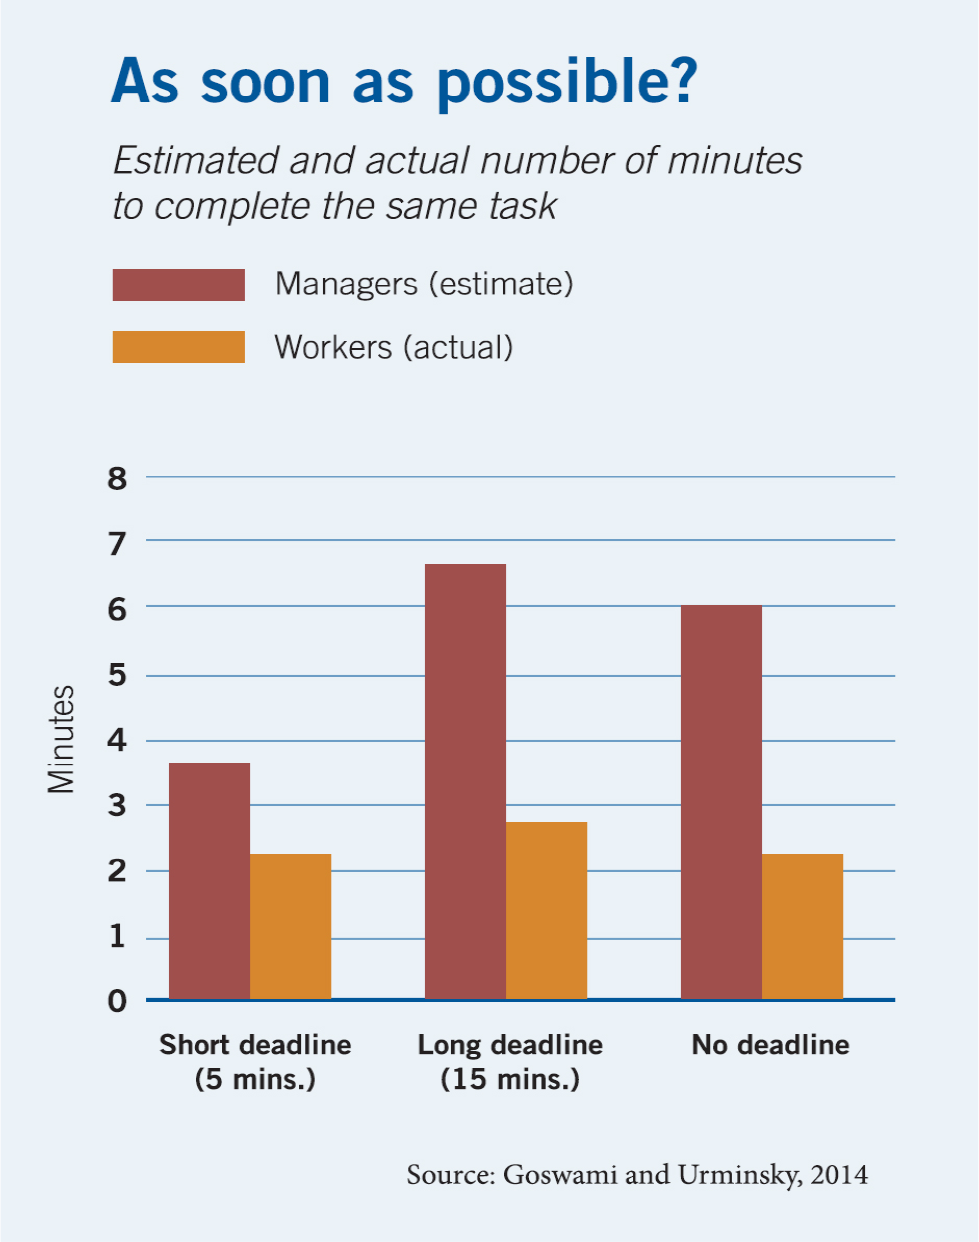 A column bar chart plotting the amount of time it takes to complete a task, with minutes on the y-axis and three deadline scenarios on the x-axis. In a short-deadline scenario, study participants acting as managers estimated the task would take about three minutes and forty five seconds to complete, while other participants acting as workers actually completed it in about two minutes and fifteen seconds. In a long deadline scenario, managers estimated six minutes and forty five seconds, while workers finished in two minutes and forty five seconds. And when there was no deadline, managers estimated six minutes, while workers completed it in two minutes and fifteen seconds.